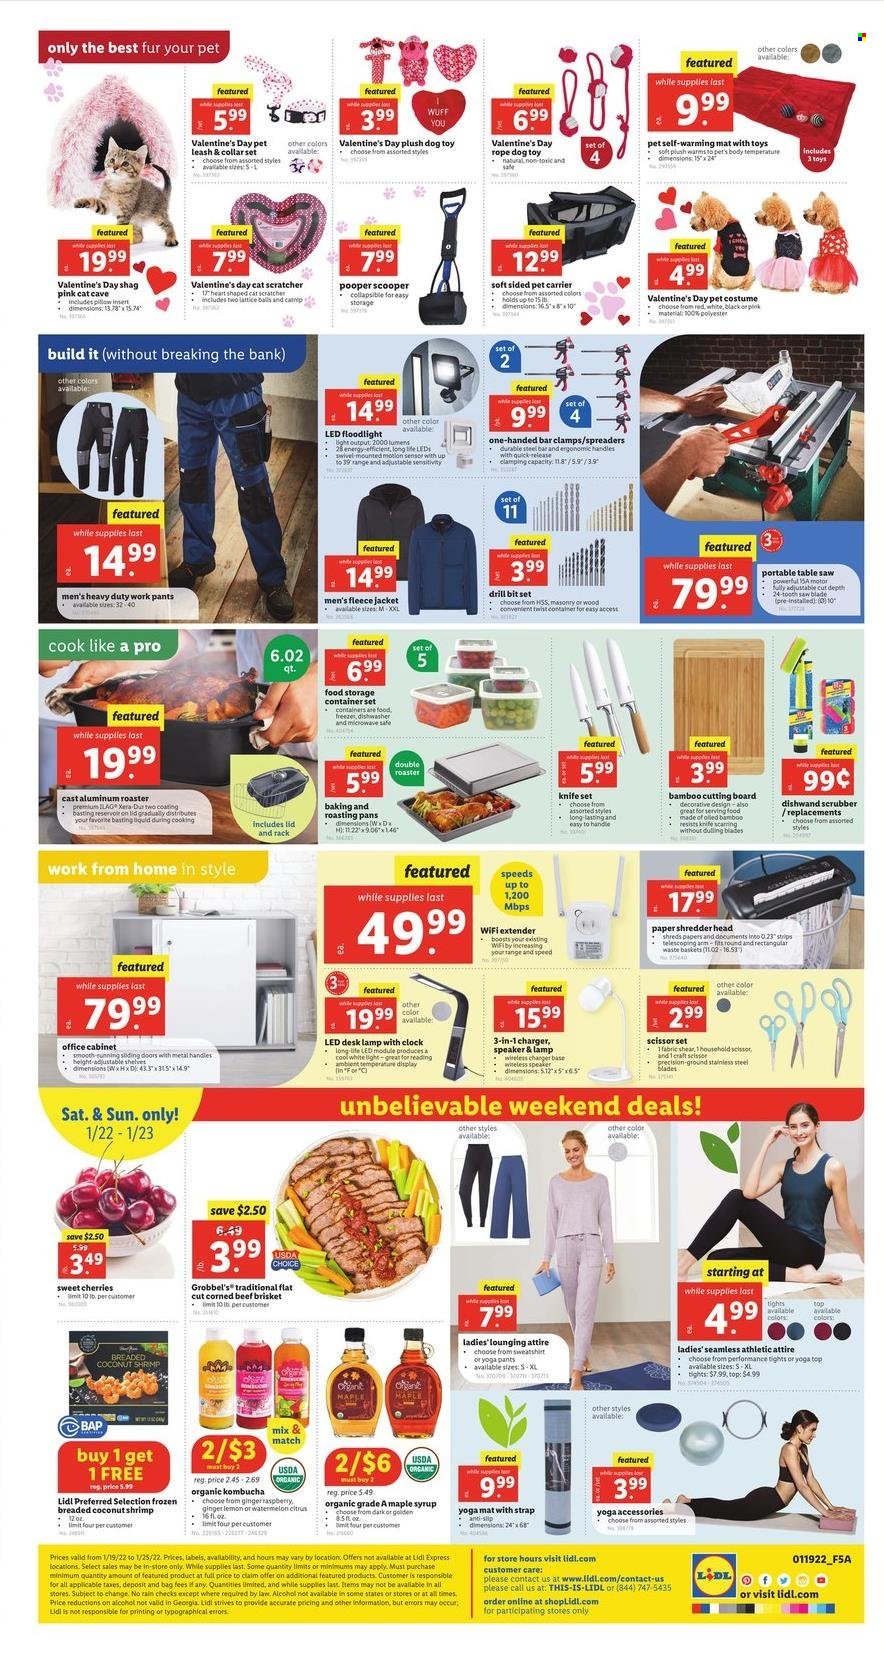 thumbnail - Lidl Flyer - 01/19/2022 - 01/25/2022 - Sales products - cherries, shrimps, corned beef, syrup, kombucha, beef meat, beef brisket, pants, knife, cutting board, lid, container, storage container set, paper, pet bed, dog toy, cat scratcher, wifi extender, speaker, roaster, shredder, cabinet, table, desk, jacket, costume, sweatshirt, tights, yoga leggins, yoga mat, floodlight, drill bit set, saw, table saw. Page 2.